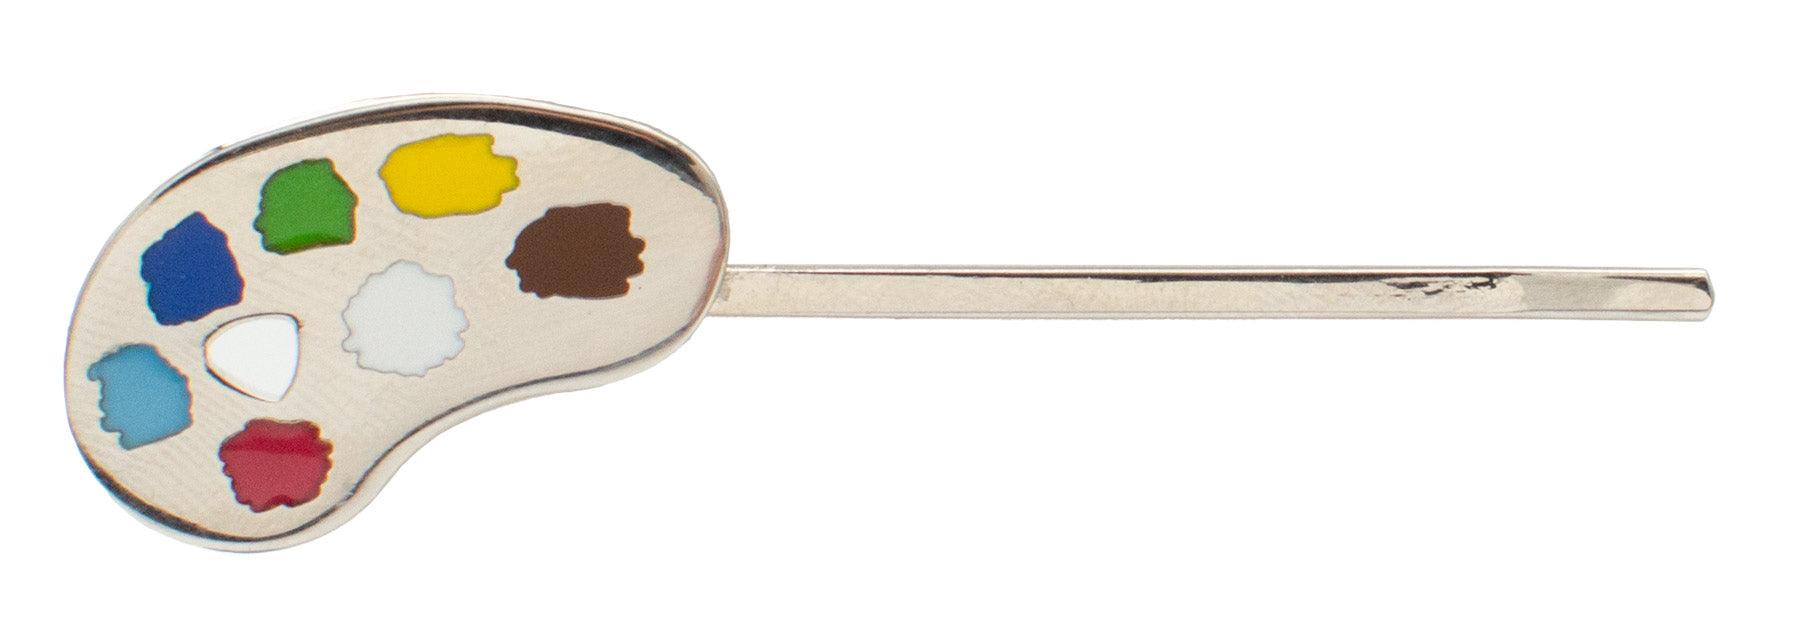 Product photo of Bob Ross Hair Pins, a novelty gift manufactured by The Unemployed Philosophers Guild.